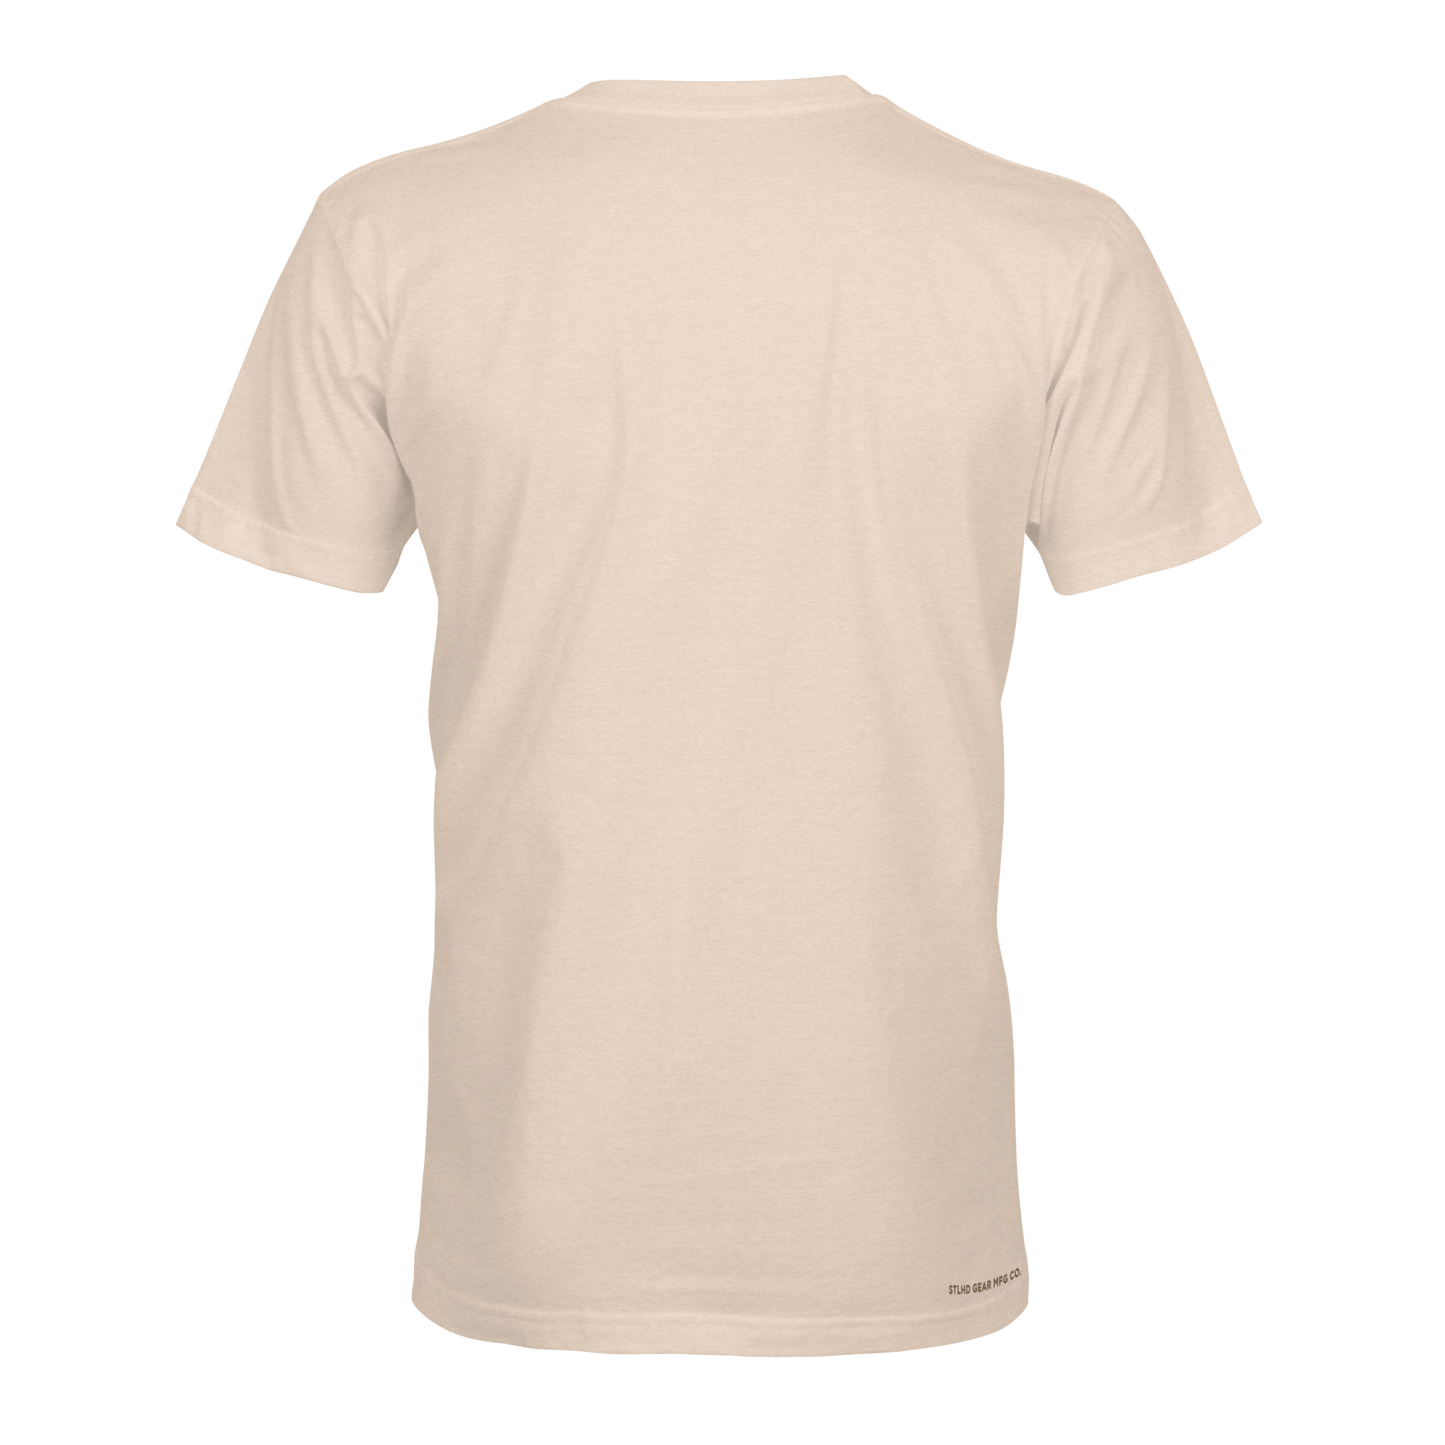 STLHD Men’s Trumpet Trout Tee - Angler's Pro Tackle & Outdoors